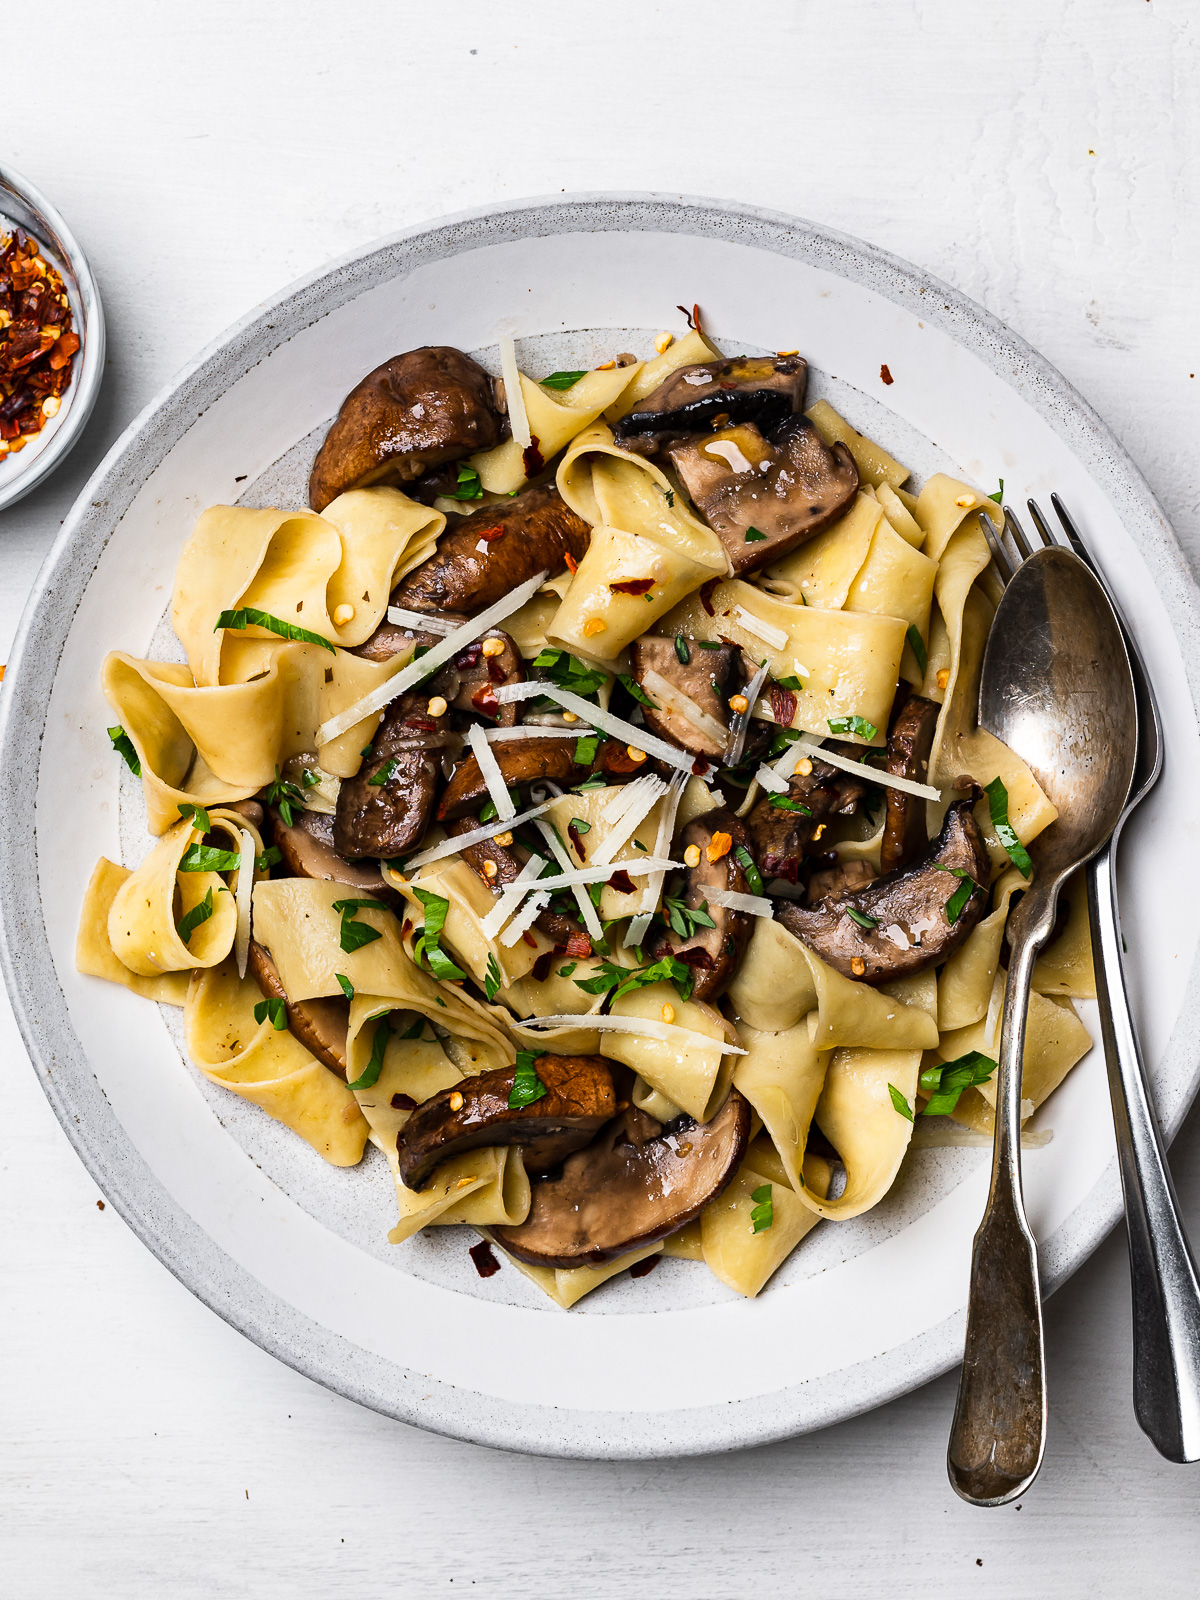 pappardelle with mushroom sauce served on plate